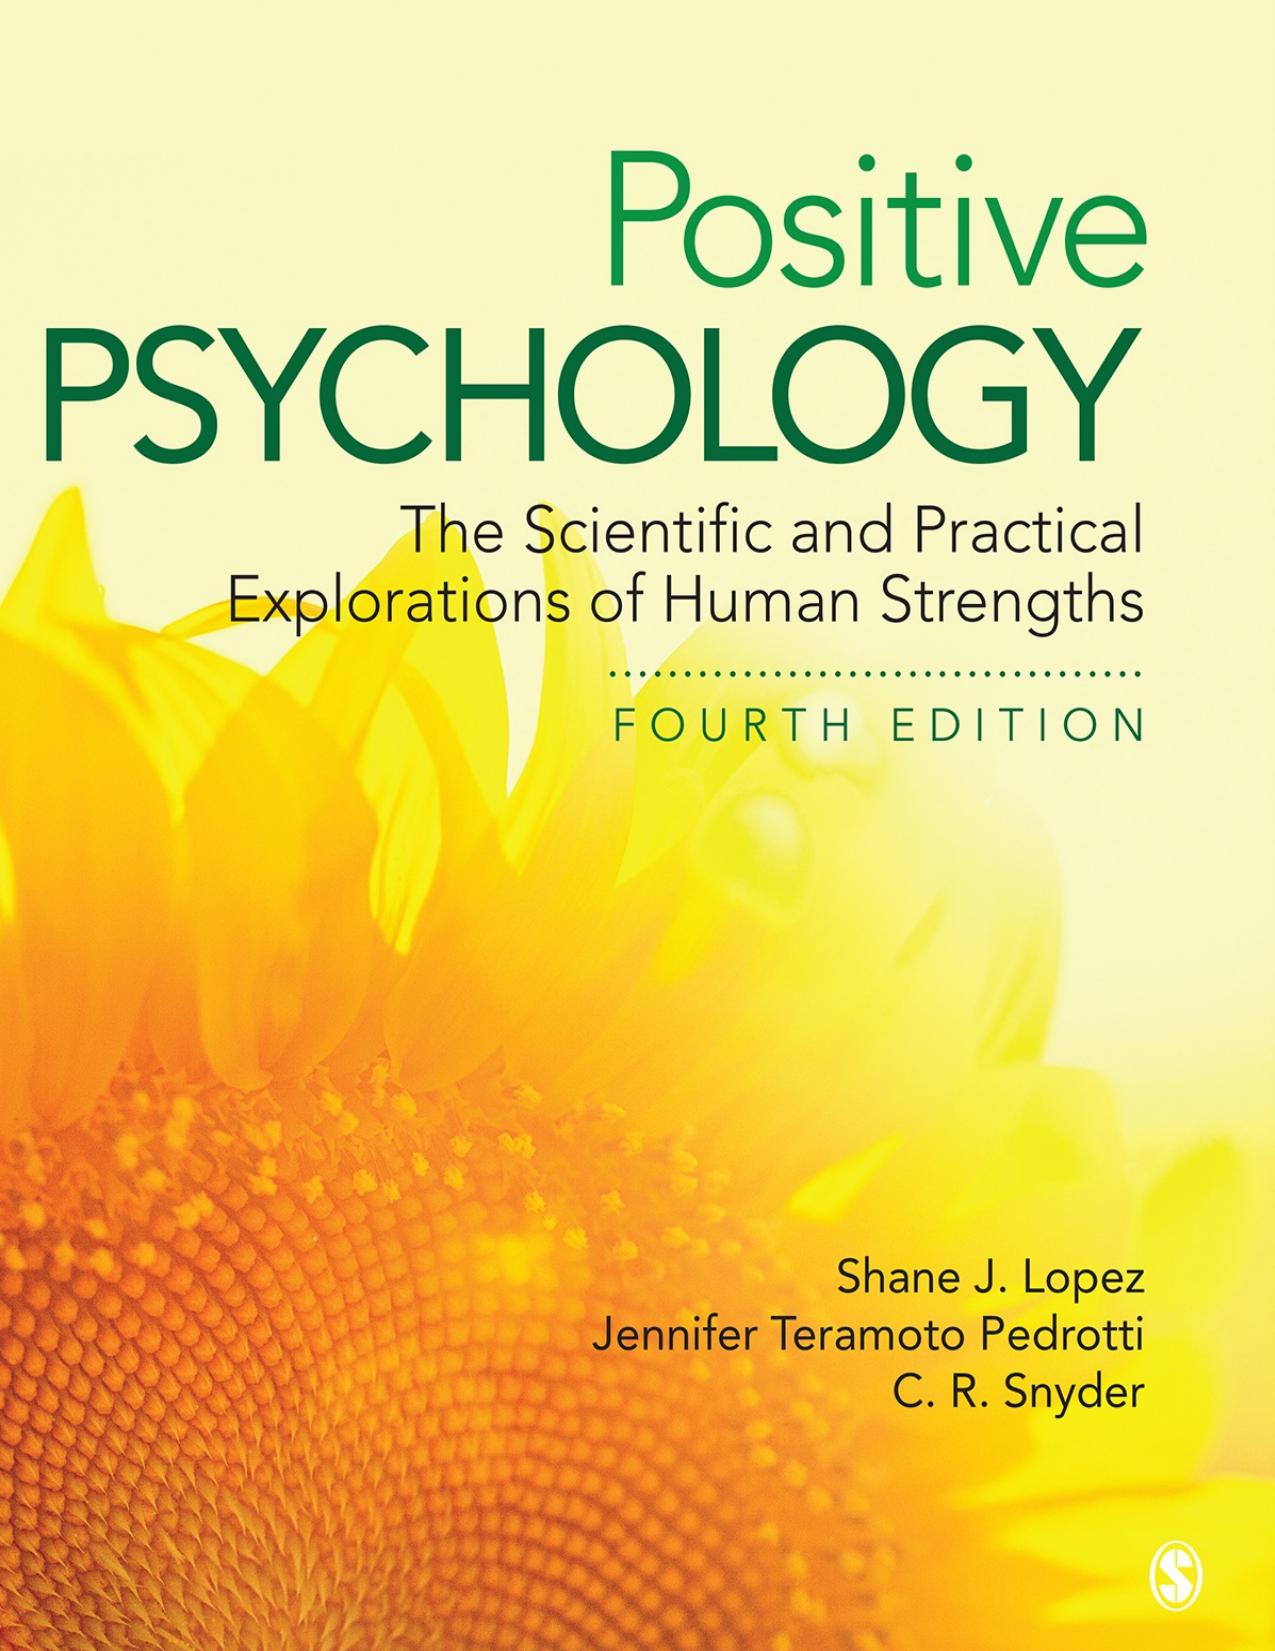 Positive Psychology The Scientific and Practical Explorations 4th - Vitalsource Download.jpg